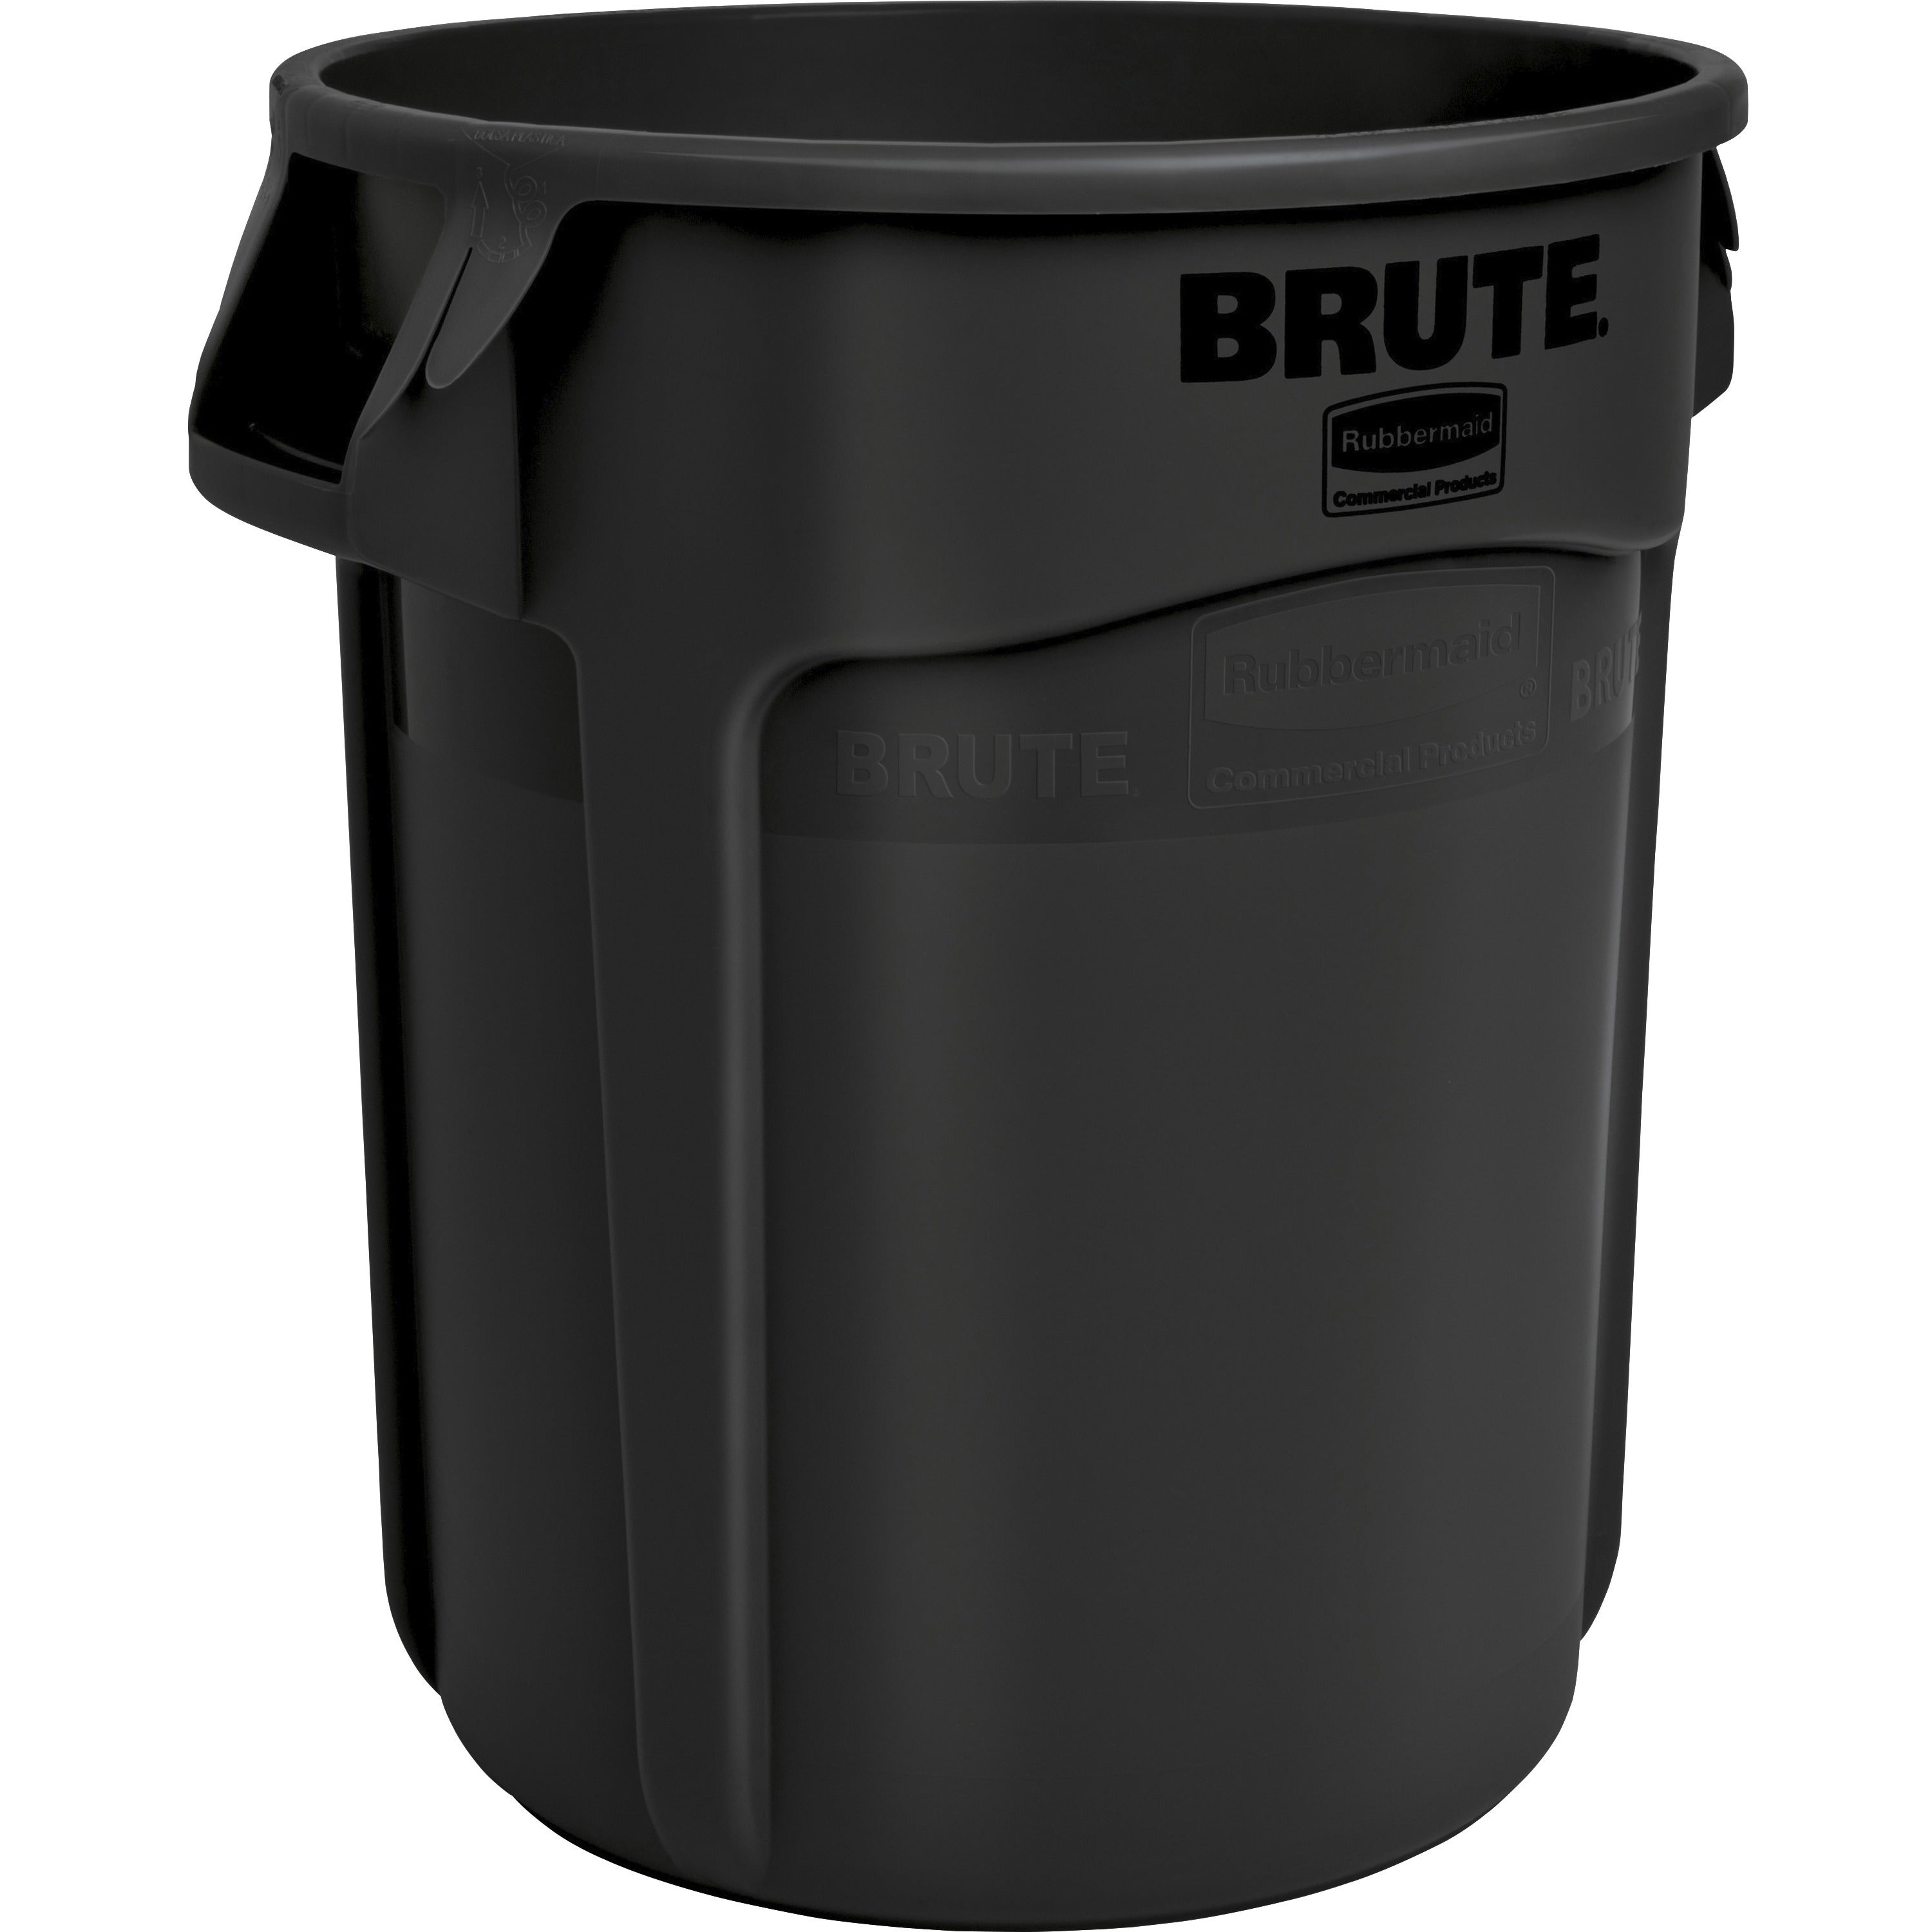 rubbermaid-commercial-vented-brute-20-gallon-container-20-gal-capacity-round-stackable-fade-resistant-warp-resistant-crack-resistant-crush-resistant-reinforced-base-durable-ergonomic-handle-contoured-base-handle-vented-tear-resistant_rcp1779734 - 1